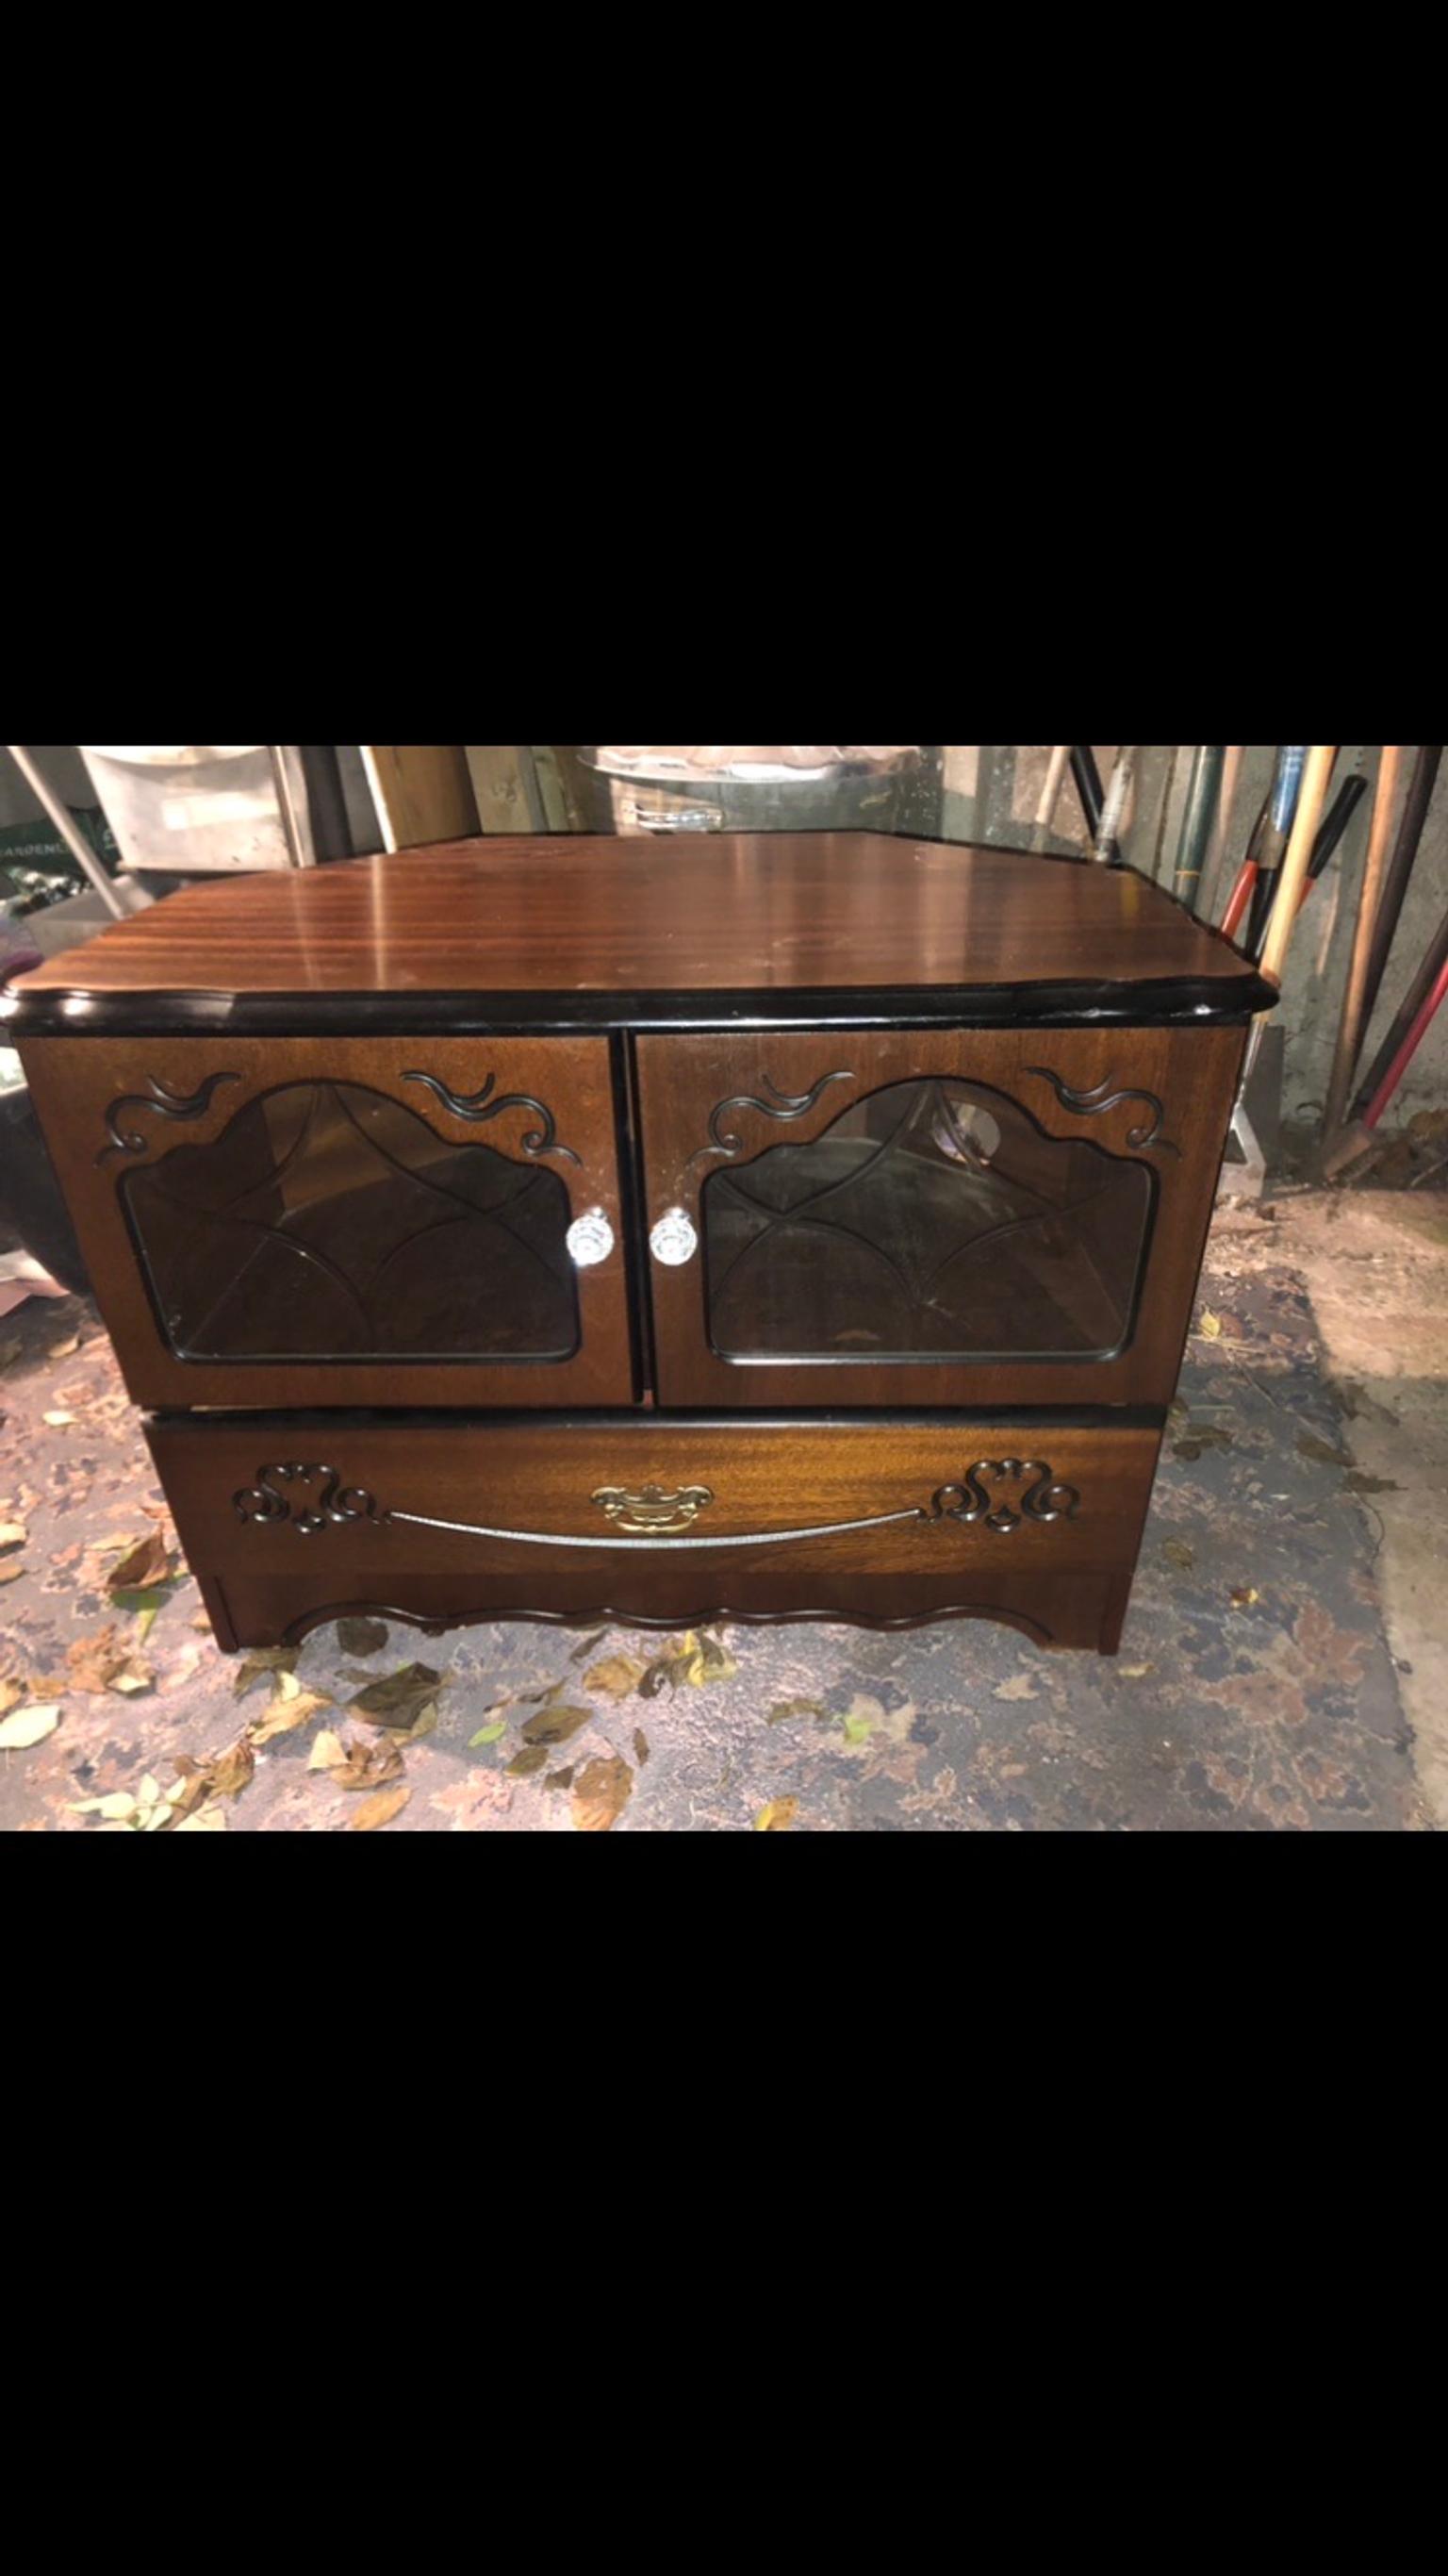 Upcycled Antique Vintage Tv Unit Side Table In Wa2 Orford For